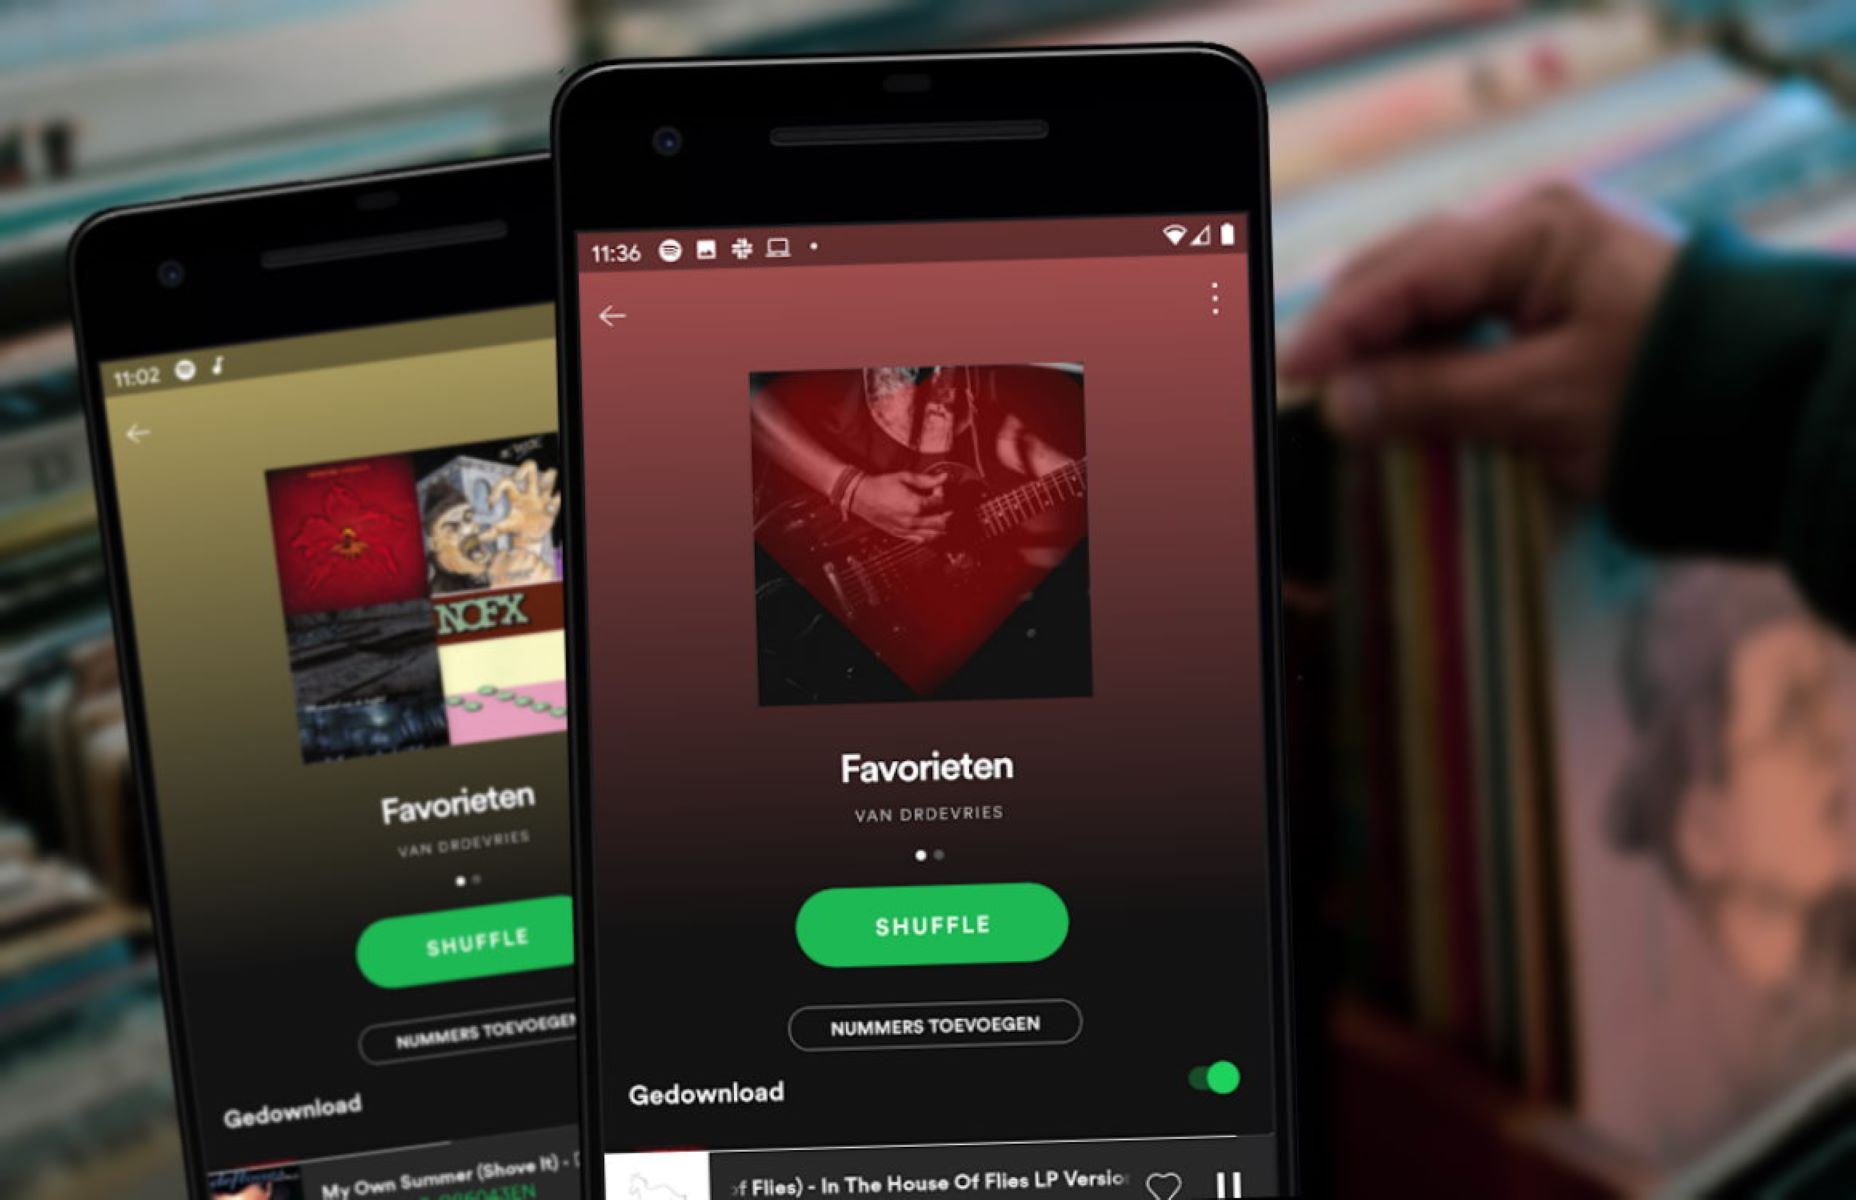 How To Reorder Songs In Spotify Playlist